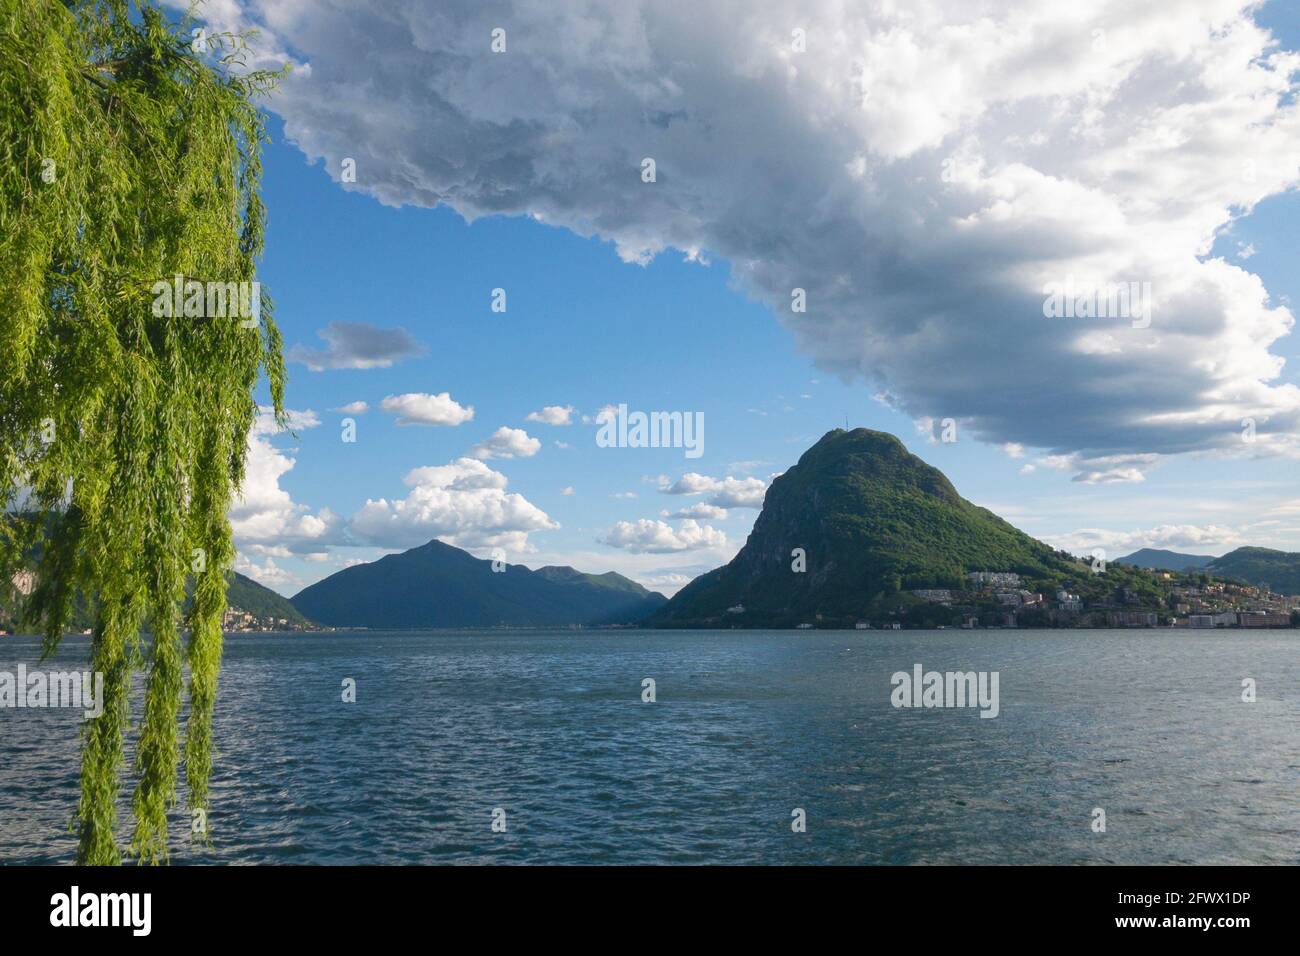 Landscape view of the beautiful Monte San Salvatore (also known as Mount San Salvatore) and the lake Lugano on a sunny day Stock Photo